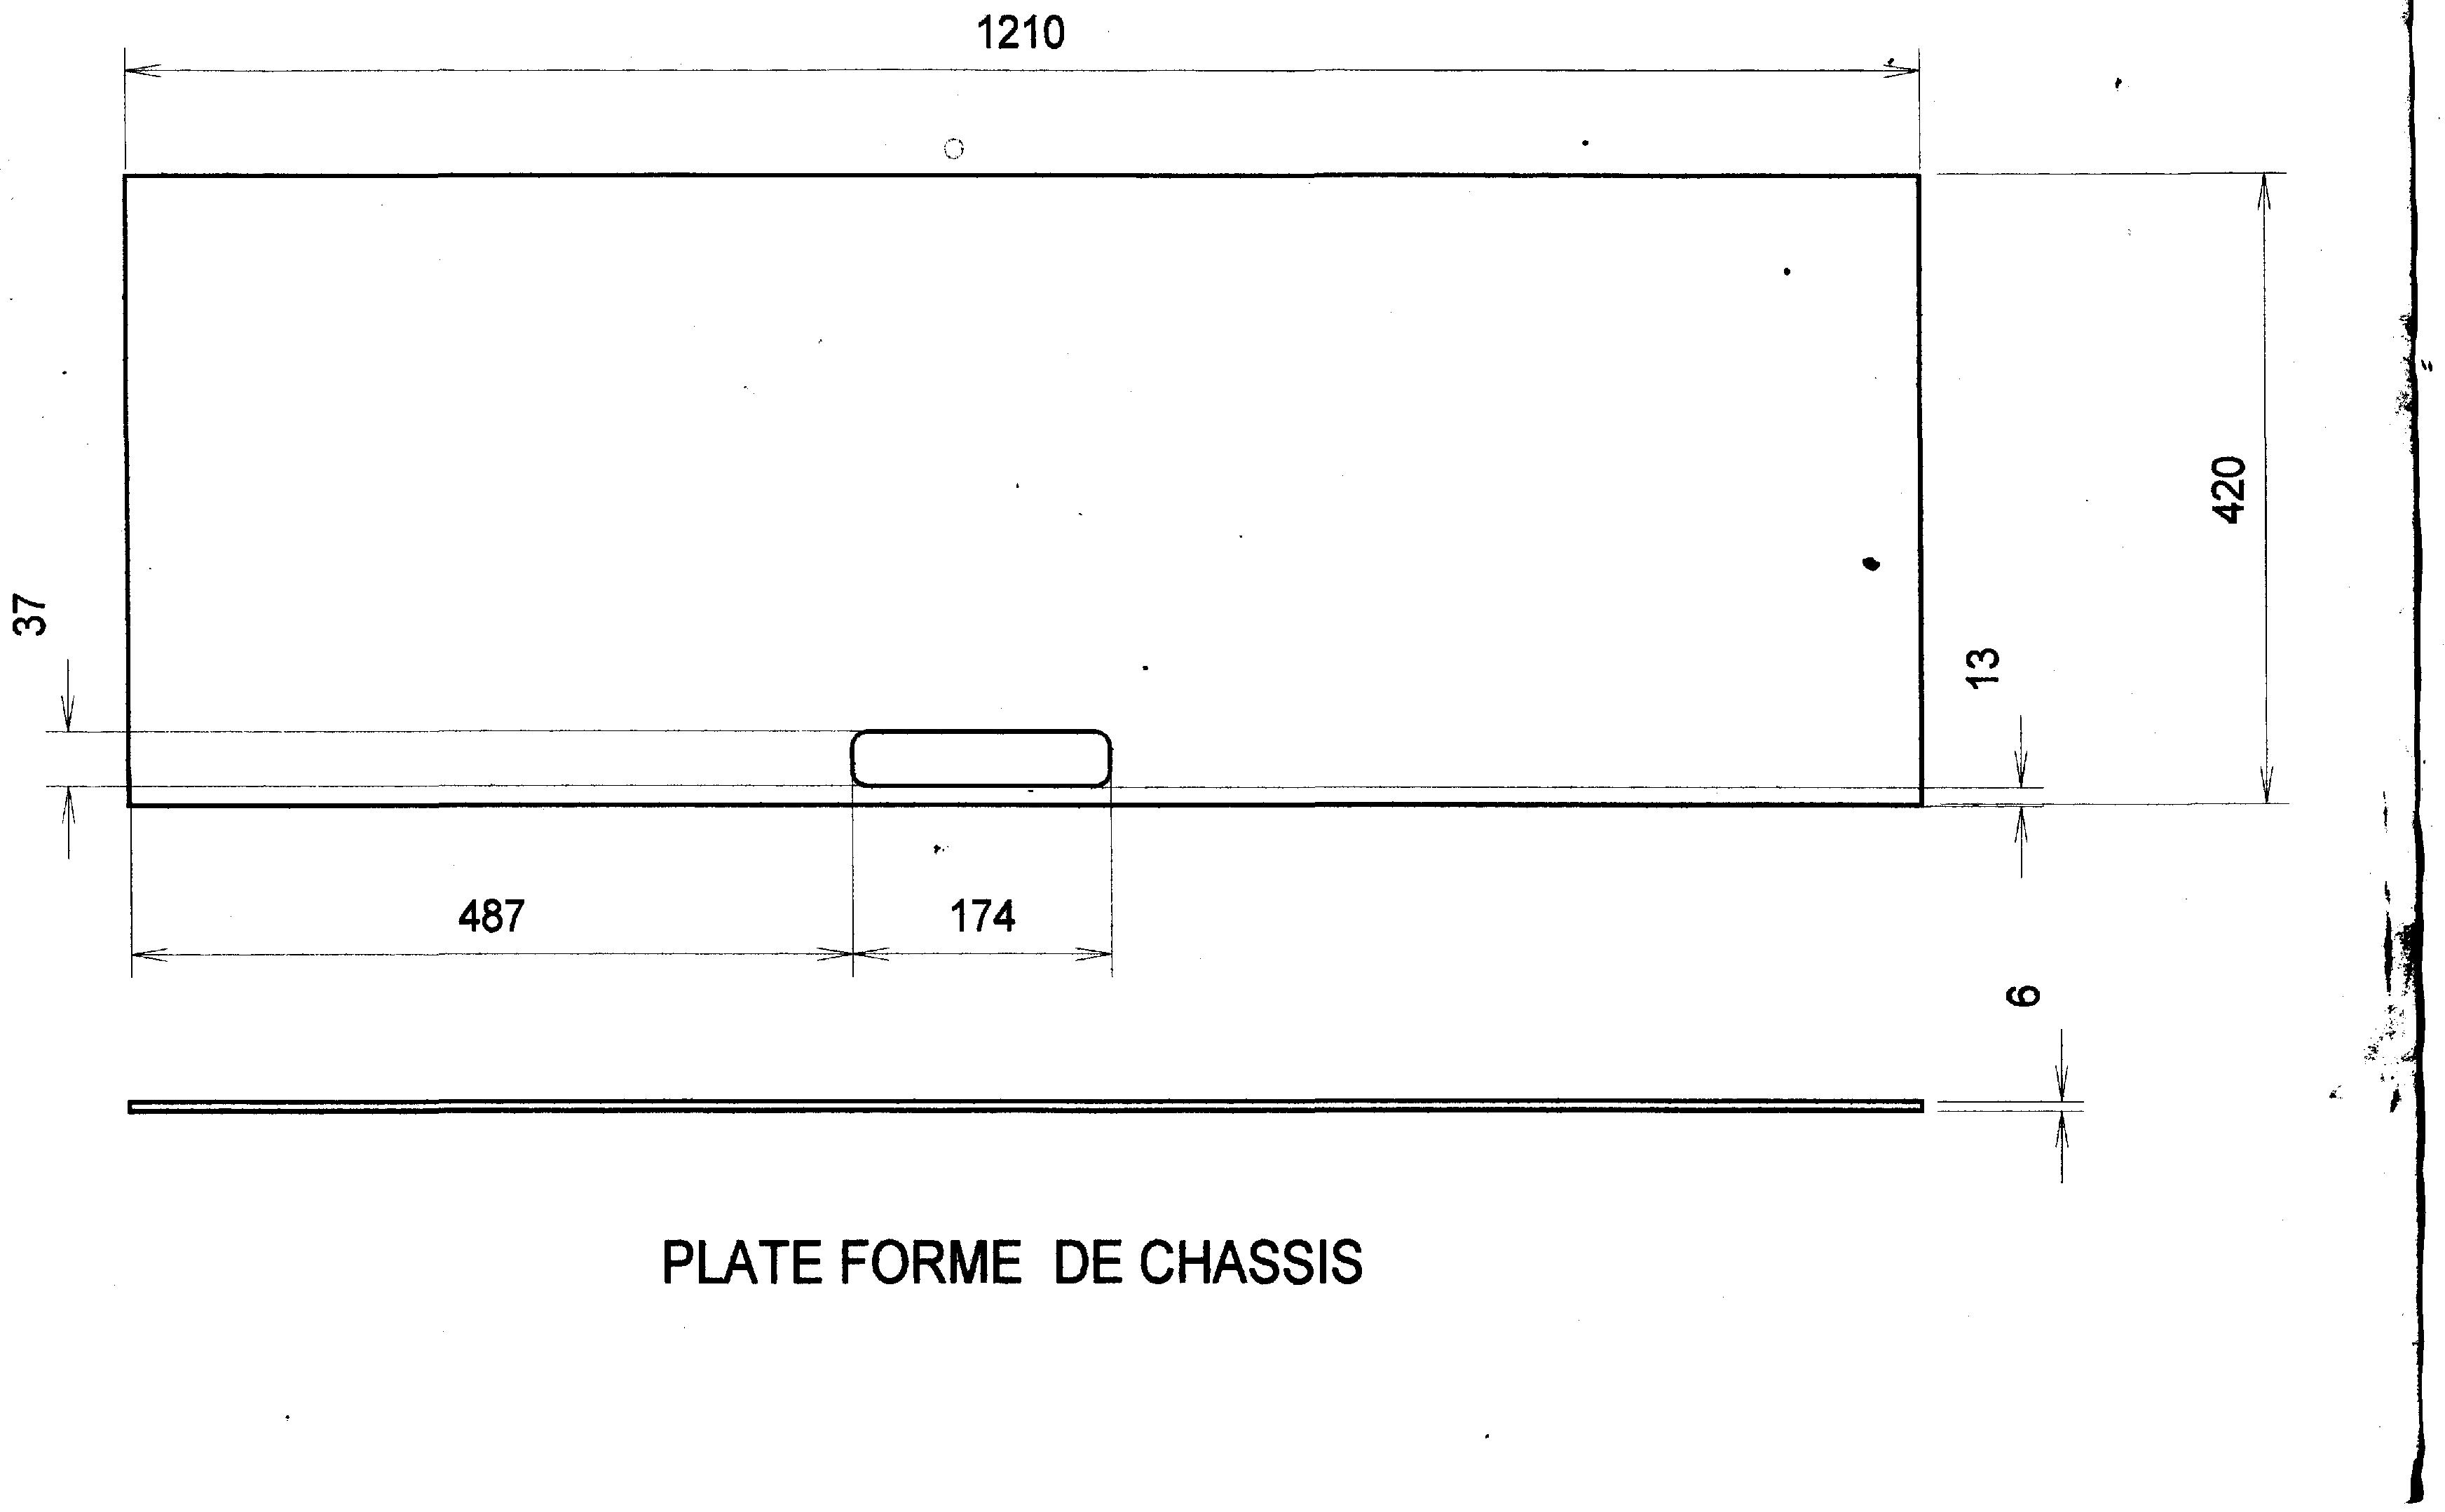 plate forme de chassis.jpg